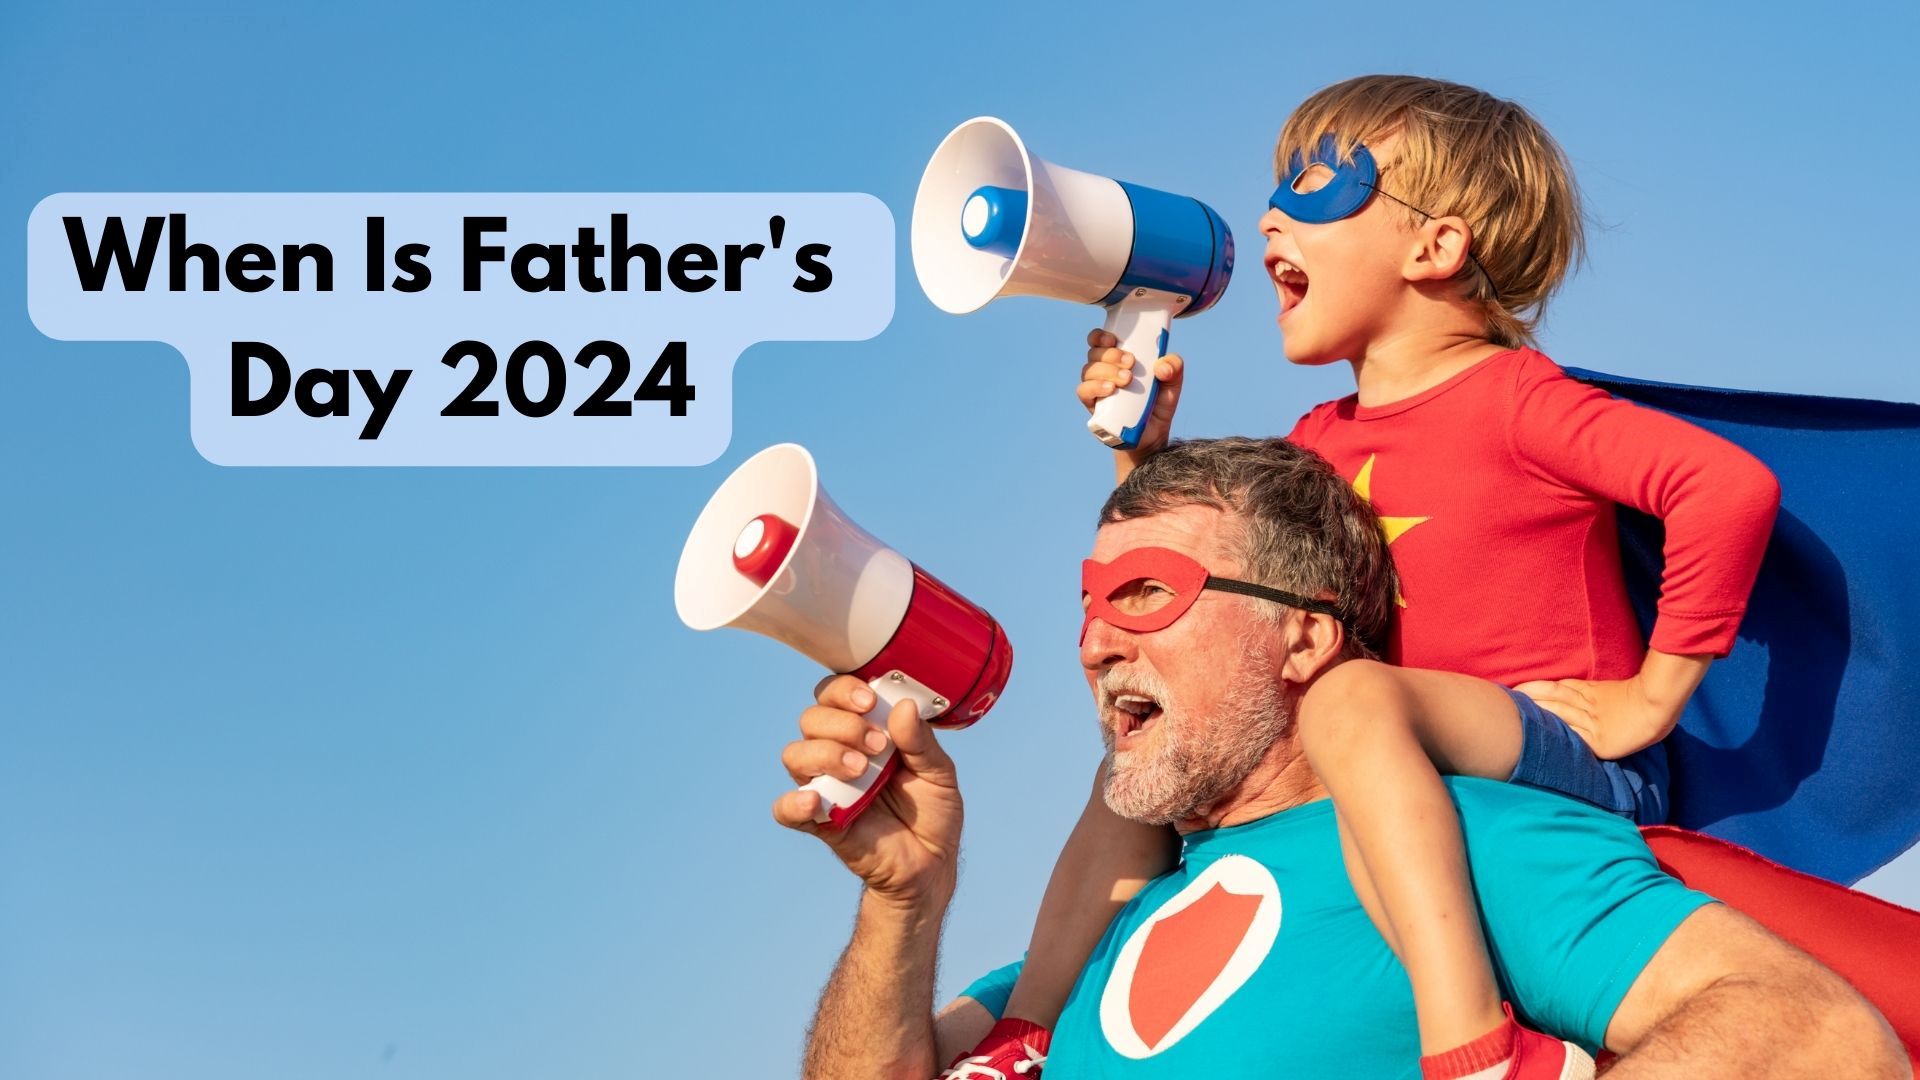 When Is Father's Day 2024? Mark Your Calendars!